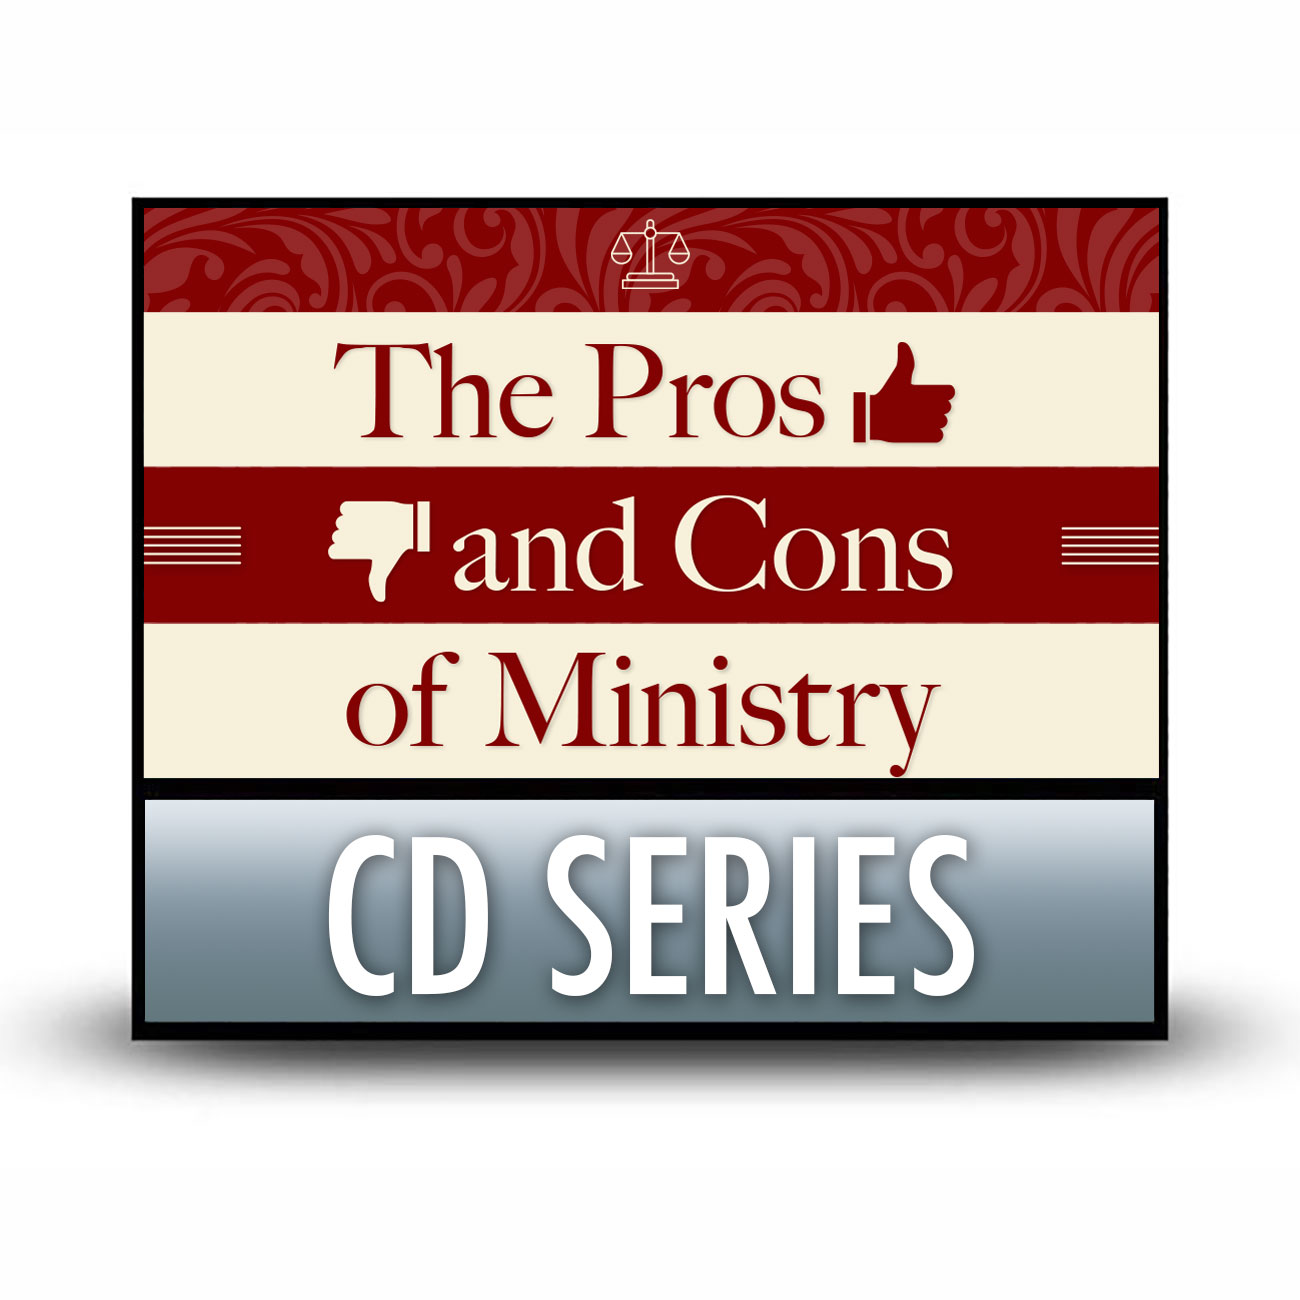 The Pros and Cons of Ministry